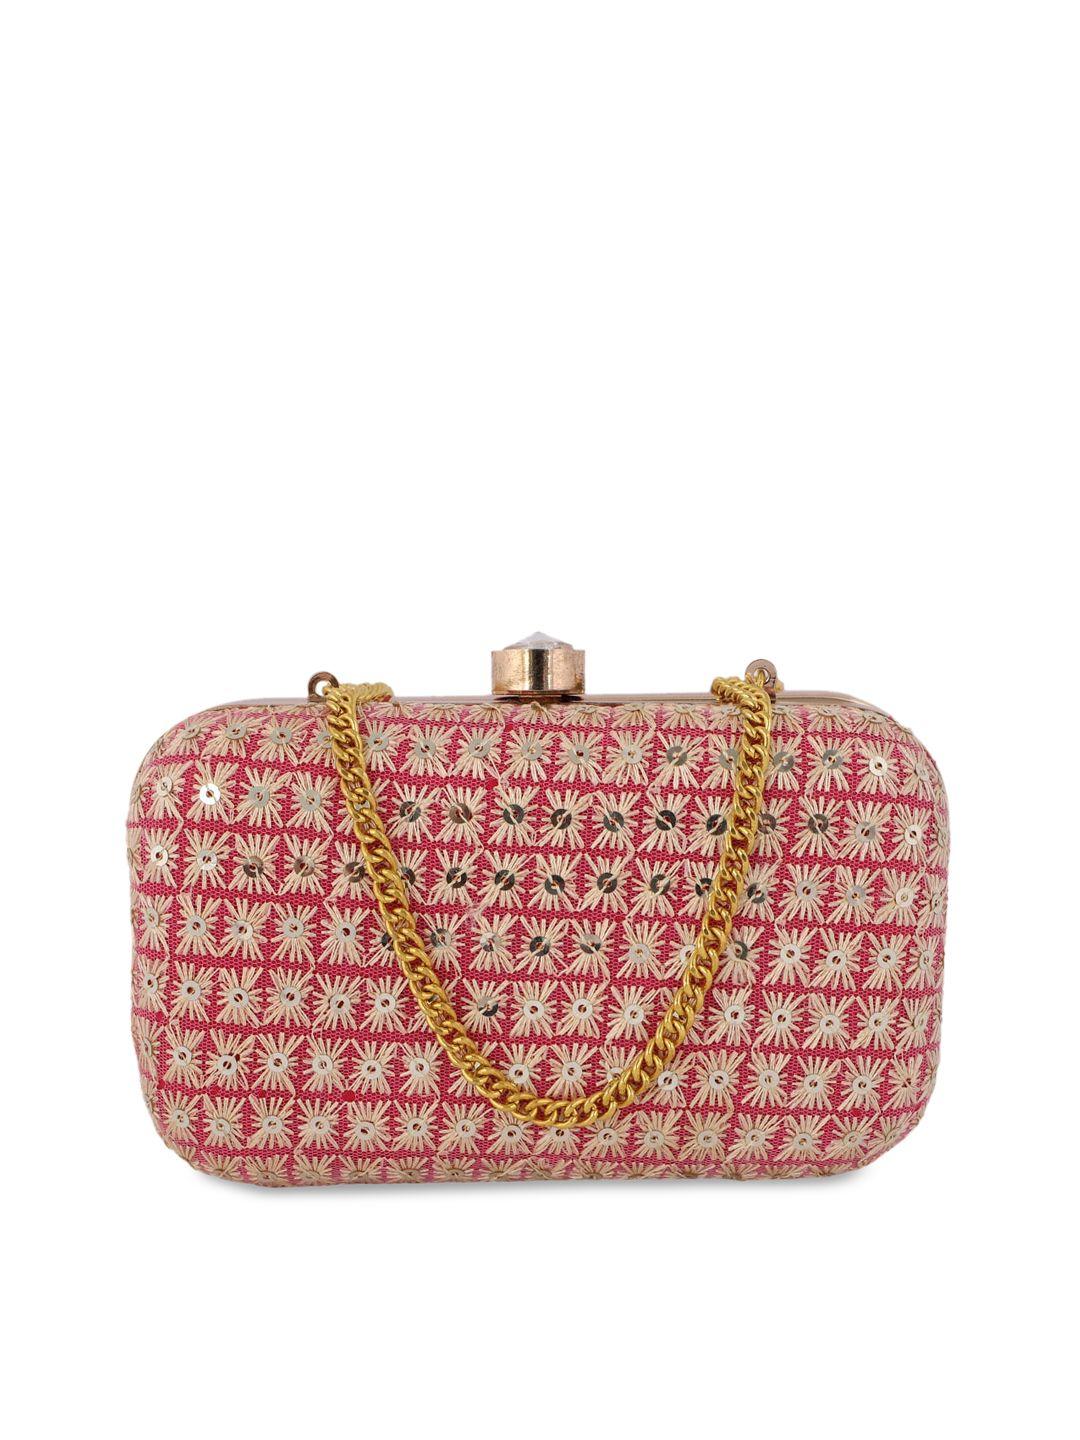 rezzy pink & red floral textured clutch